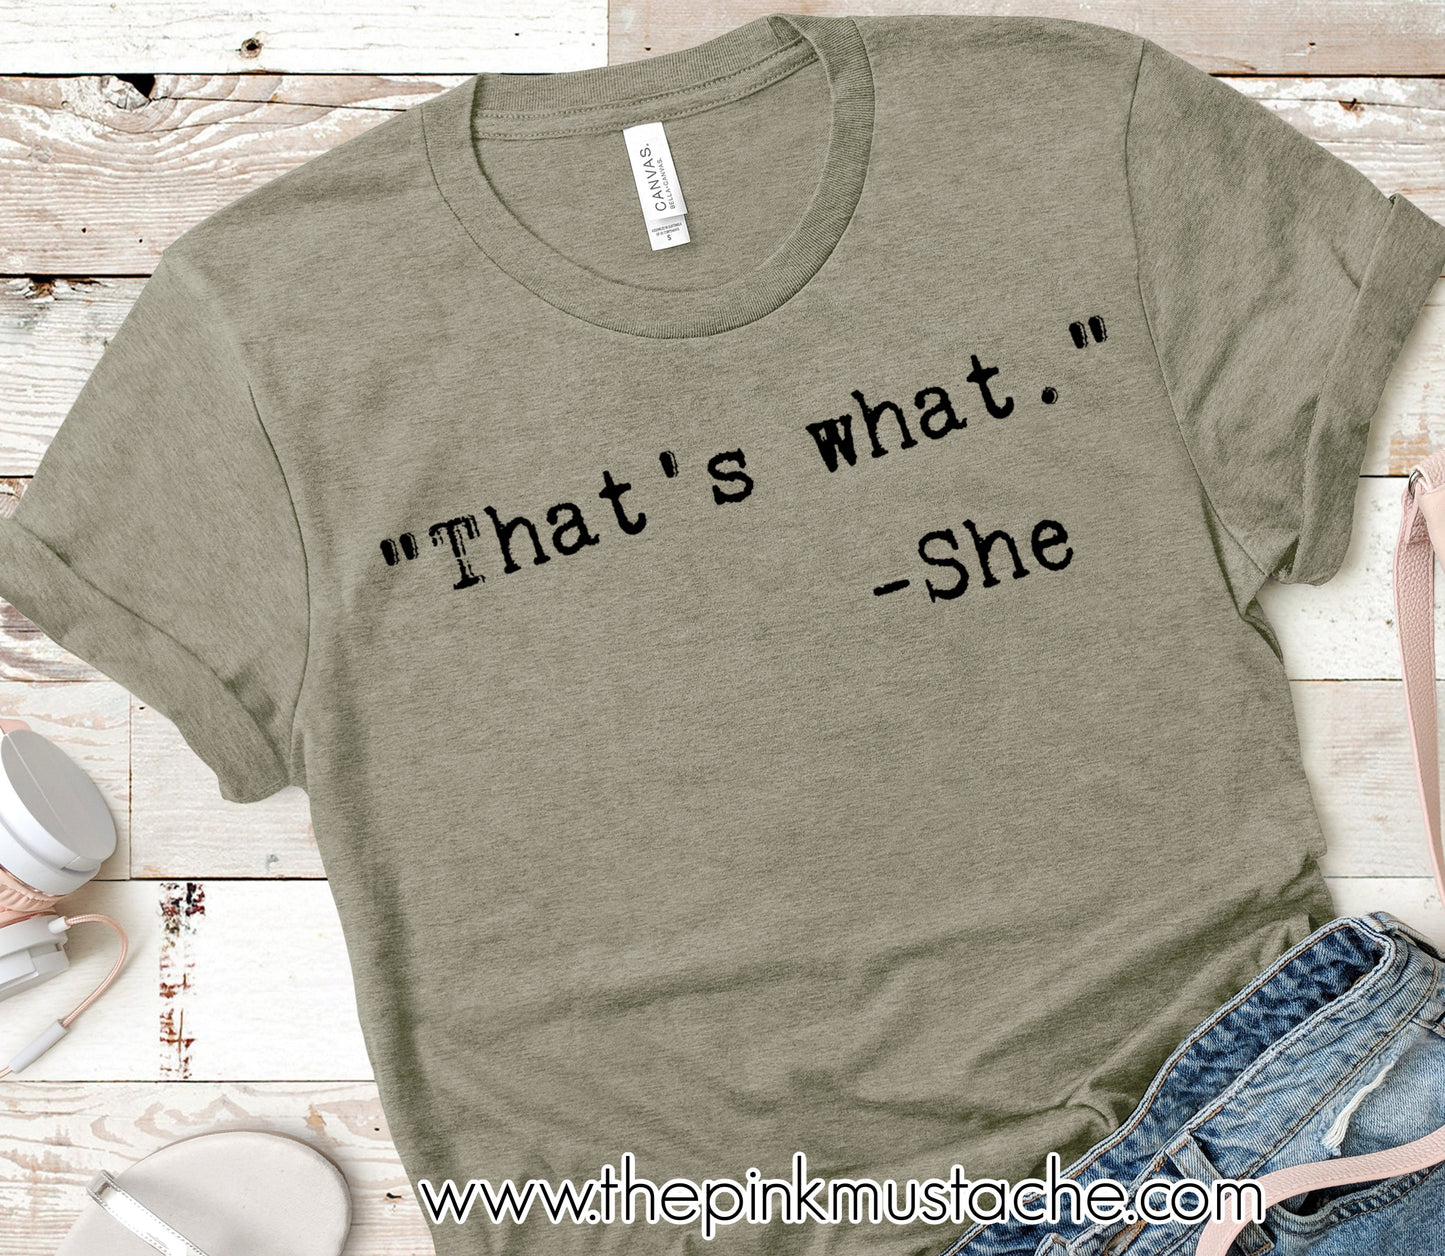 That's What She Said Shirt/ T-Shirt/ Bella Canvas Tee/- Funny Tees For Men and Women